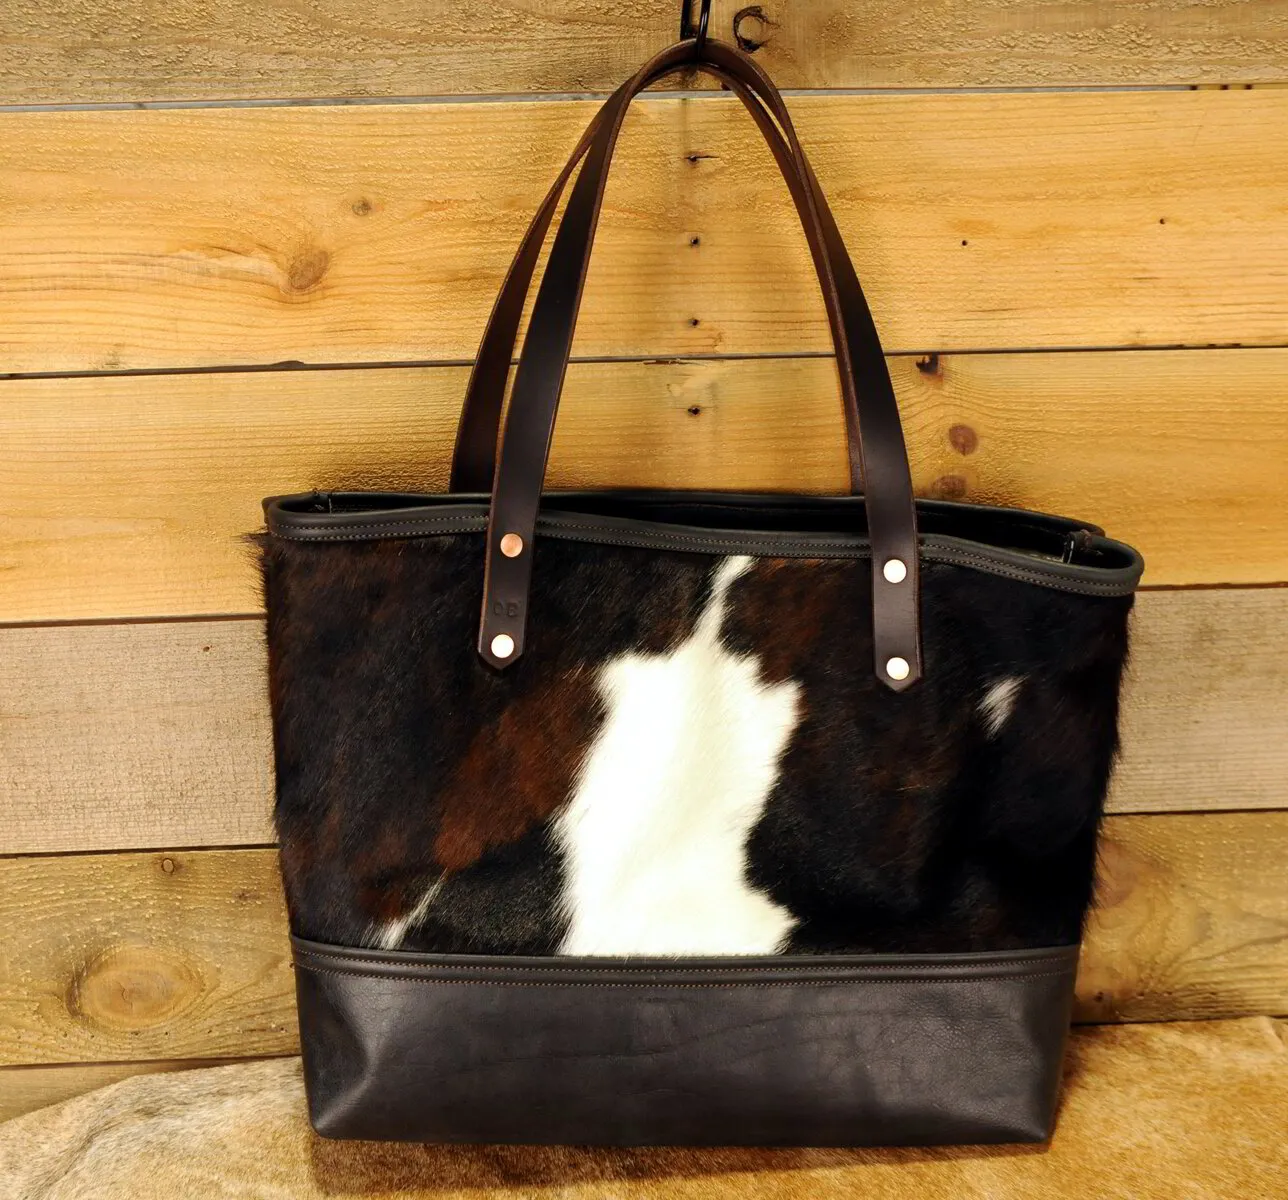 Large Deluxe W/Hair Tote Bag : Black/tricolor/Russet Straps